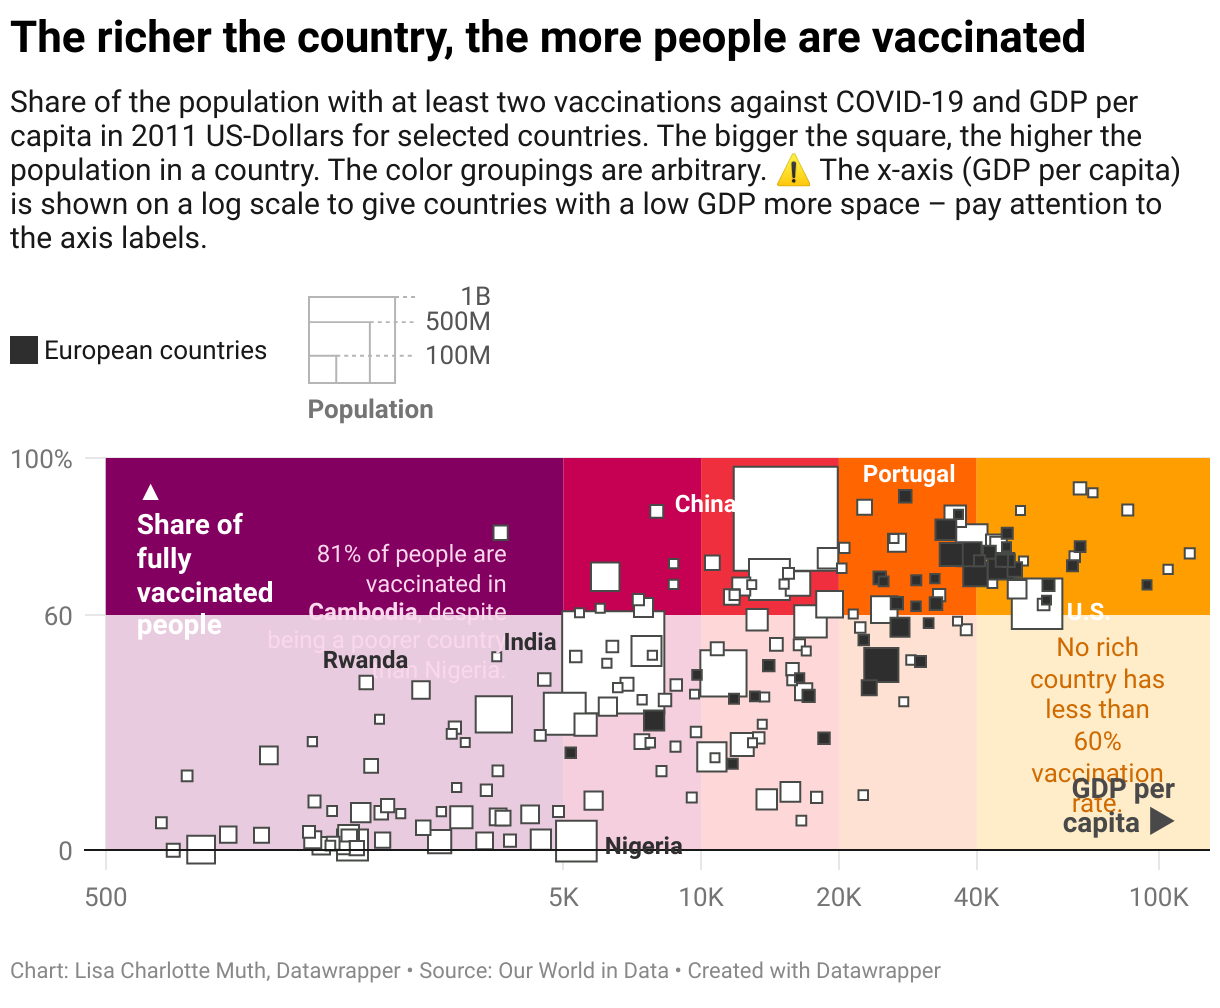 A scatterplot showing the correlation between the share of the population with at least two vaccinations against COVID-19, and GDP per capita in 2011 US-Dollars for all countries where both data points were available. The chart shows a clear correlation between how rich a country is and how many of its people are vaccinated. 